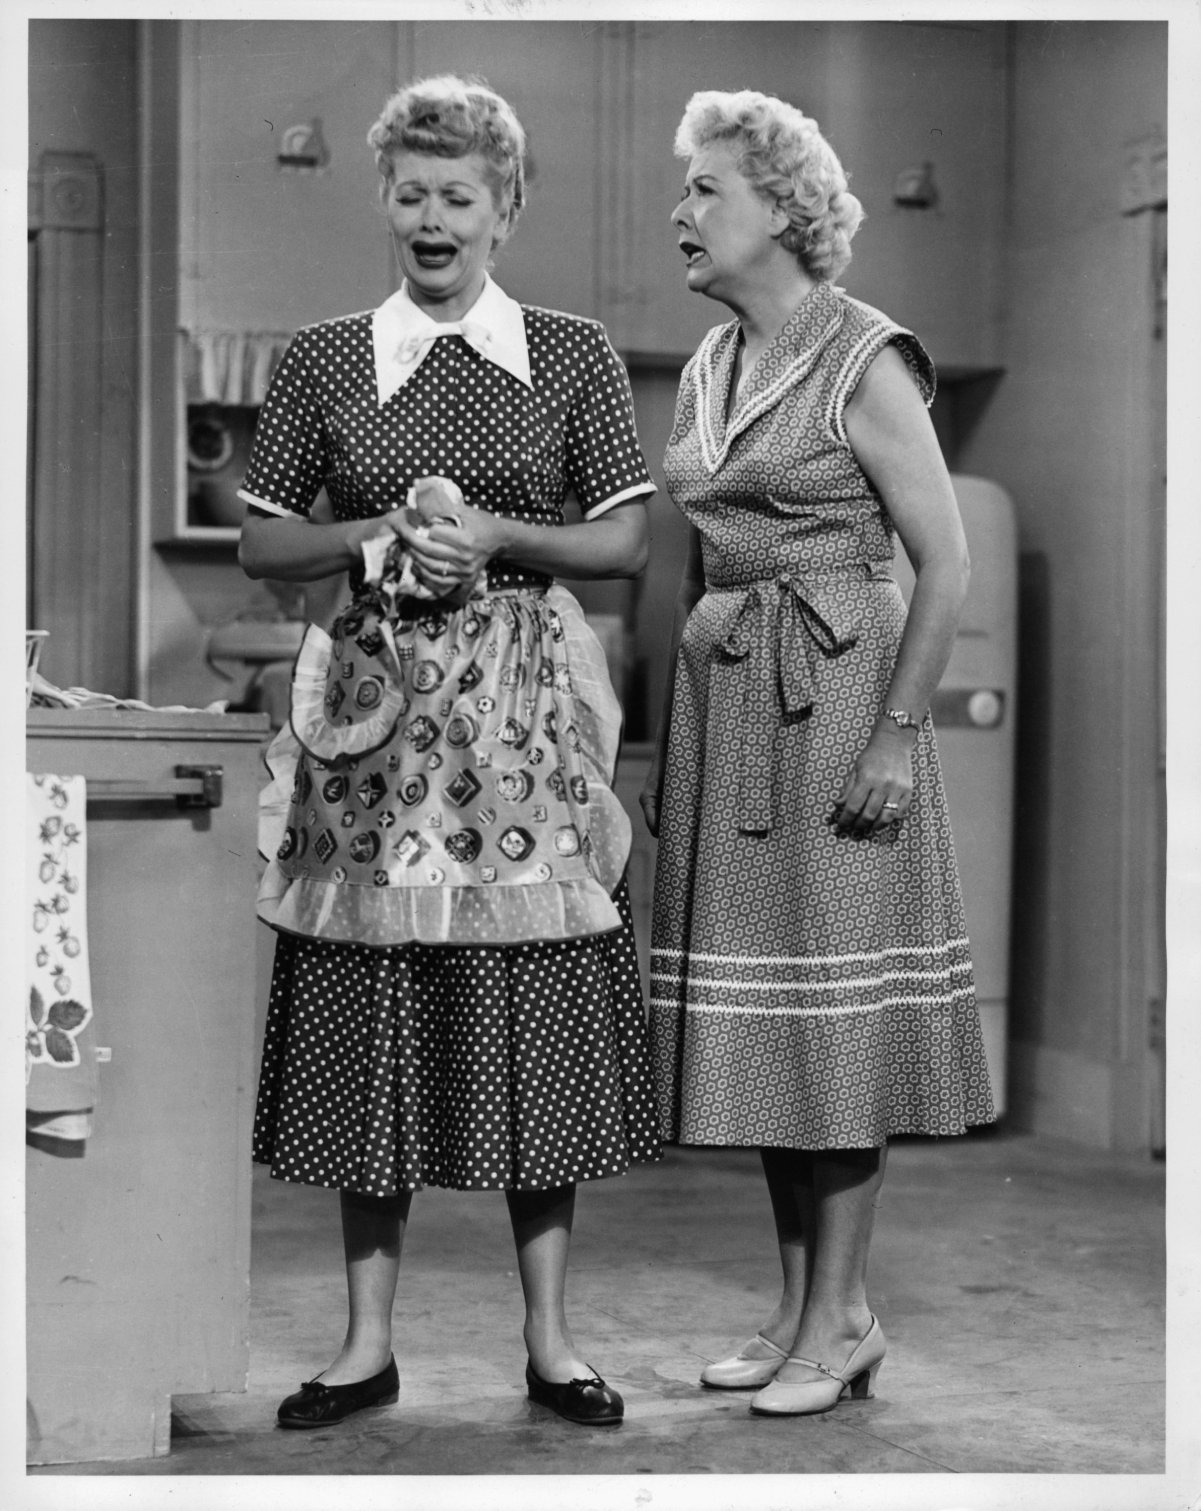 Lucille Ball and Vivian Vance in 'I Love Lucy'